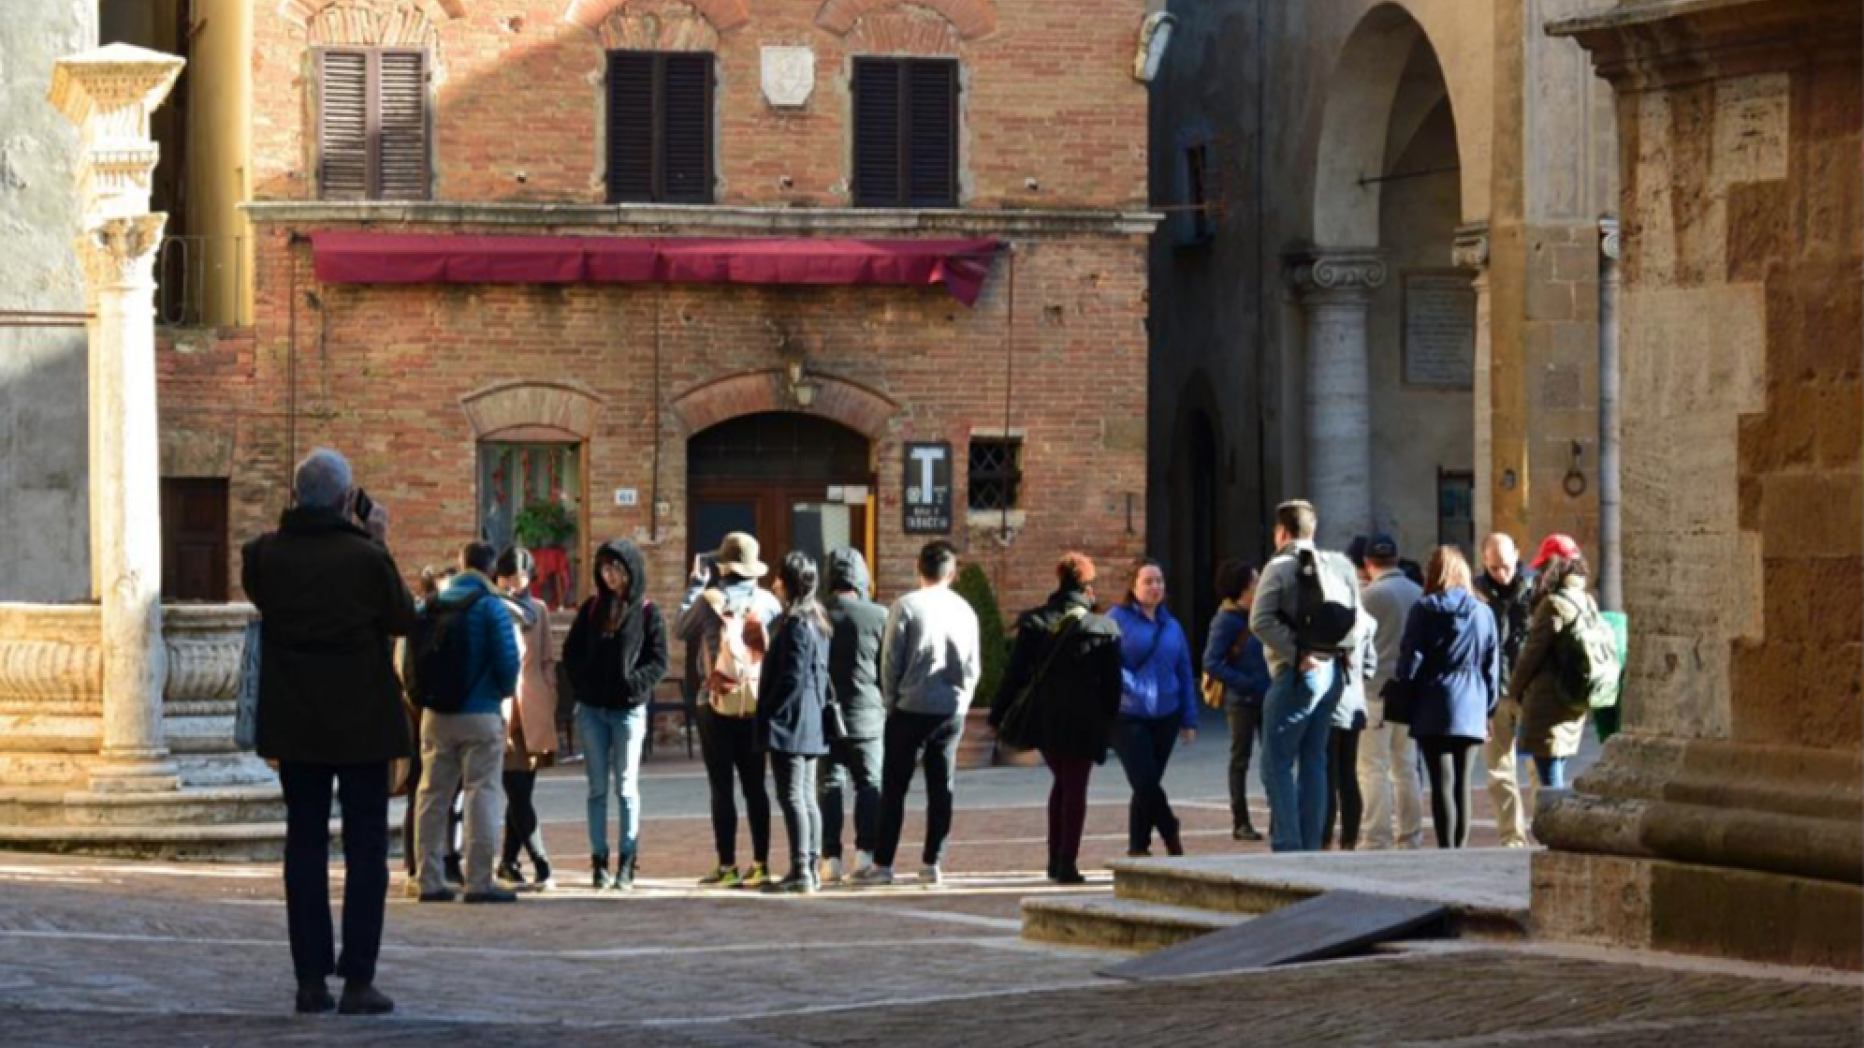 Tourists walking in old Italian city.